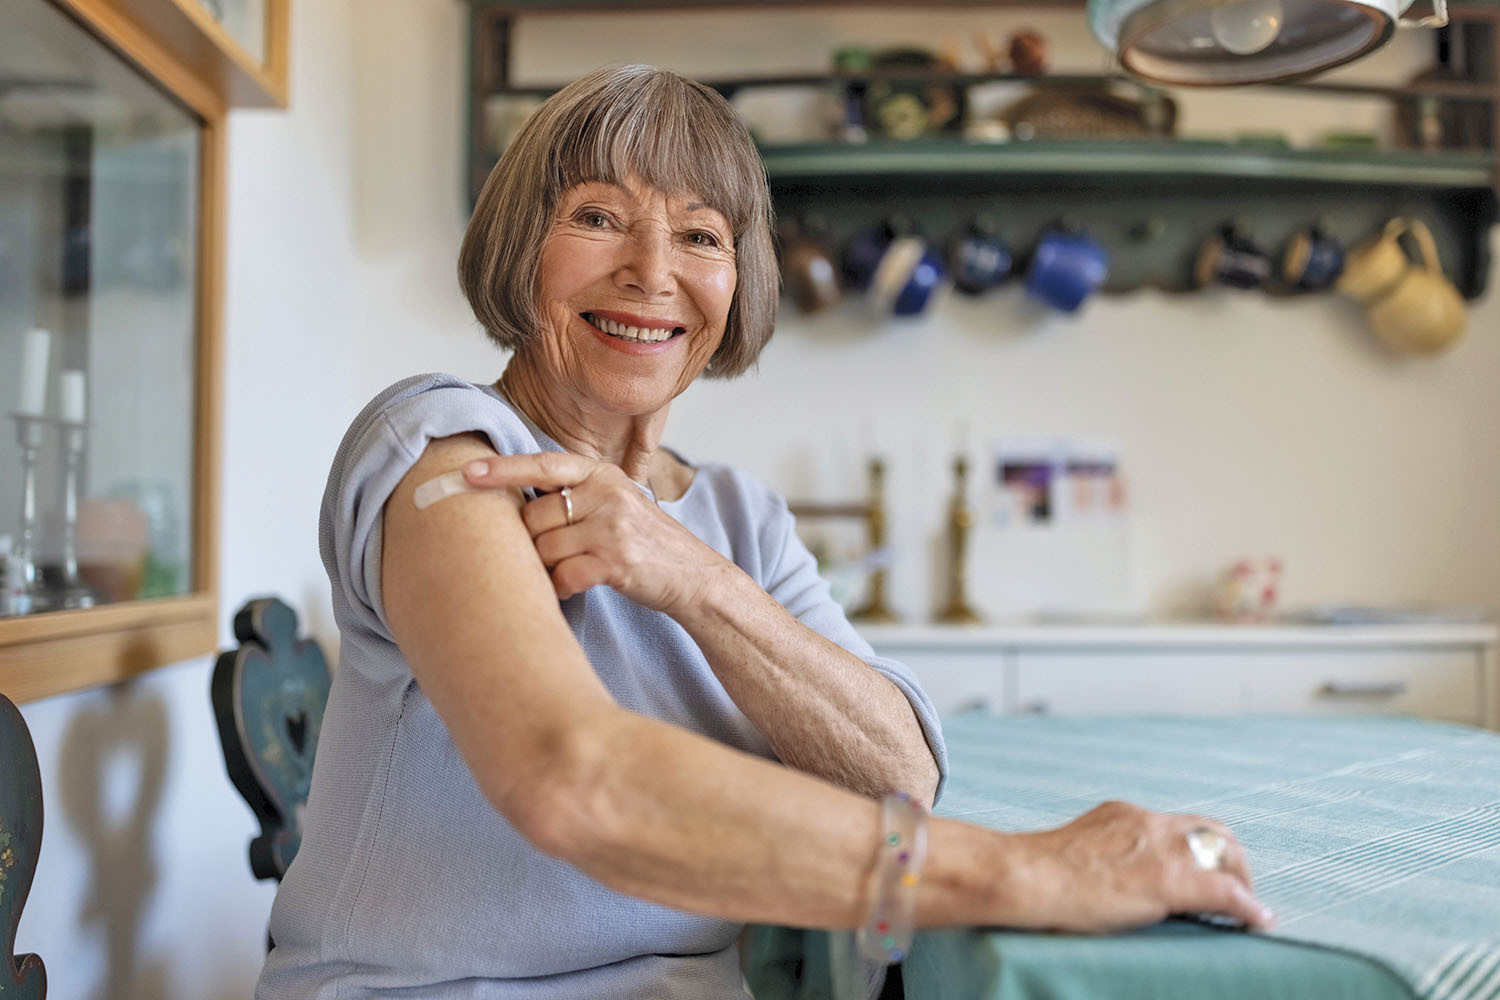 photo of a smiling woman sitting in her kitchen, pointing to a bandage on her upper arm where she received a vaccination